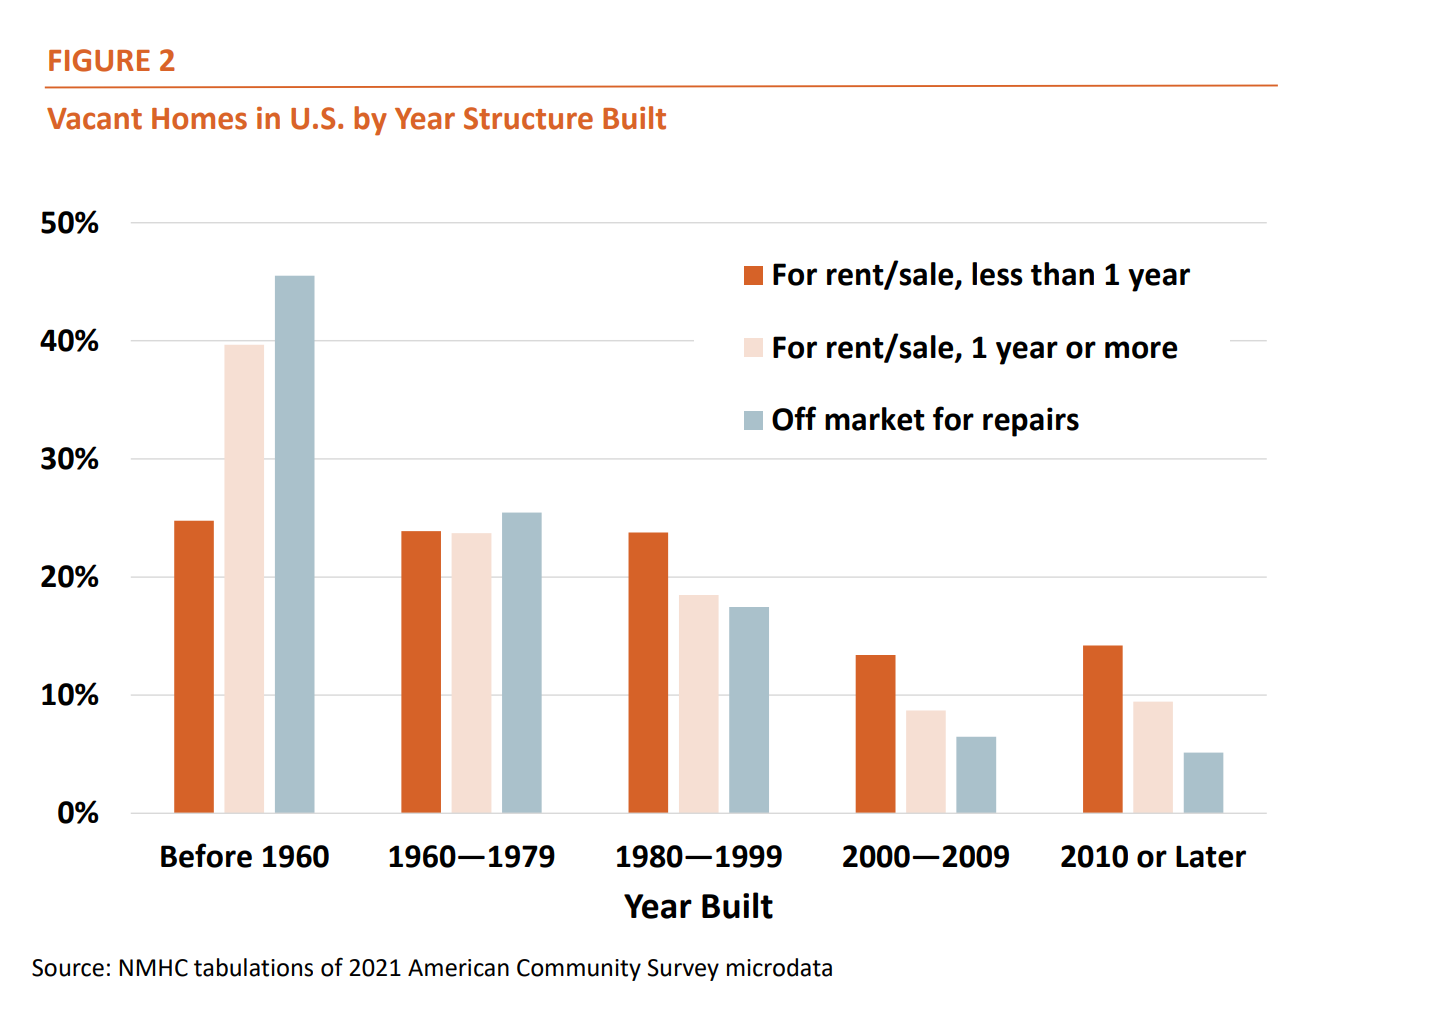 Figure 2 - Vacant Homes in U.S. by Year Structure Built
